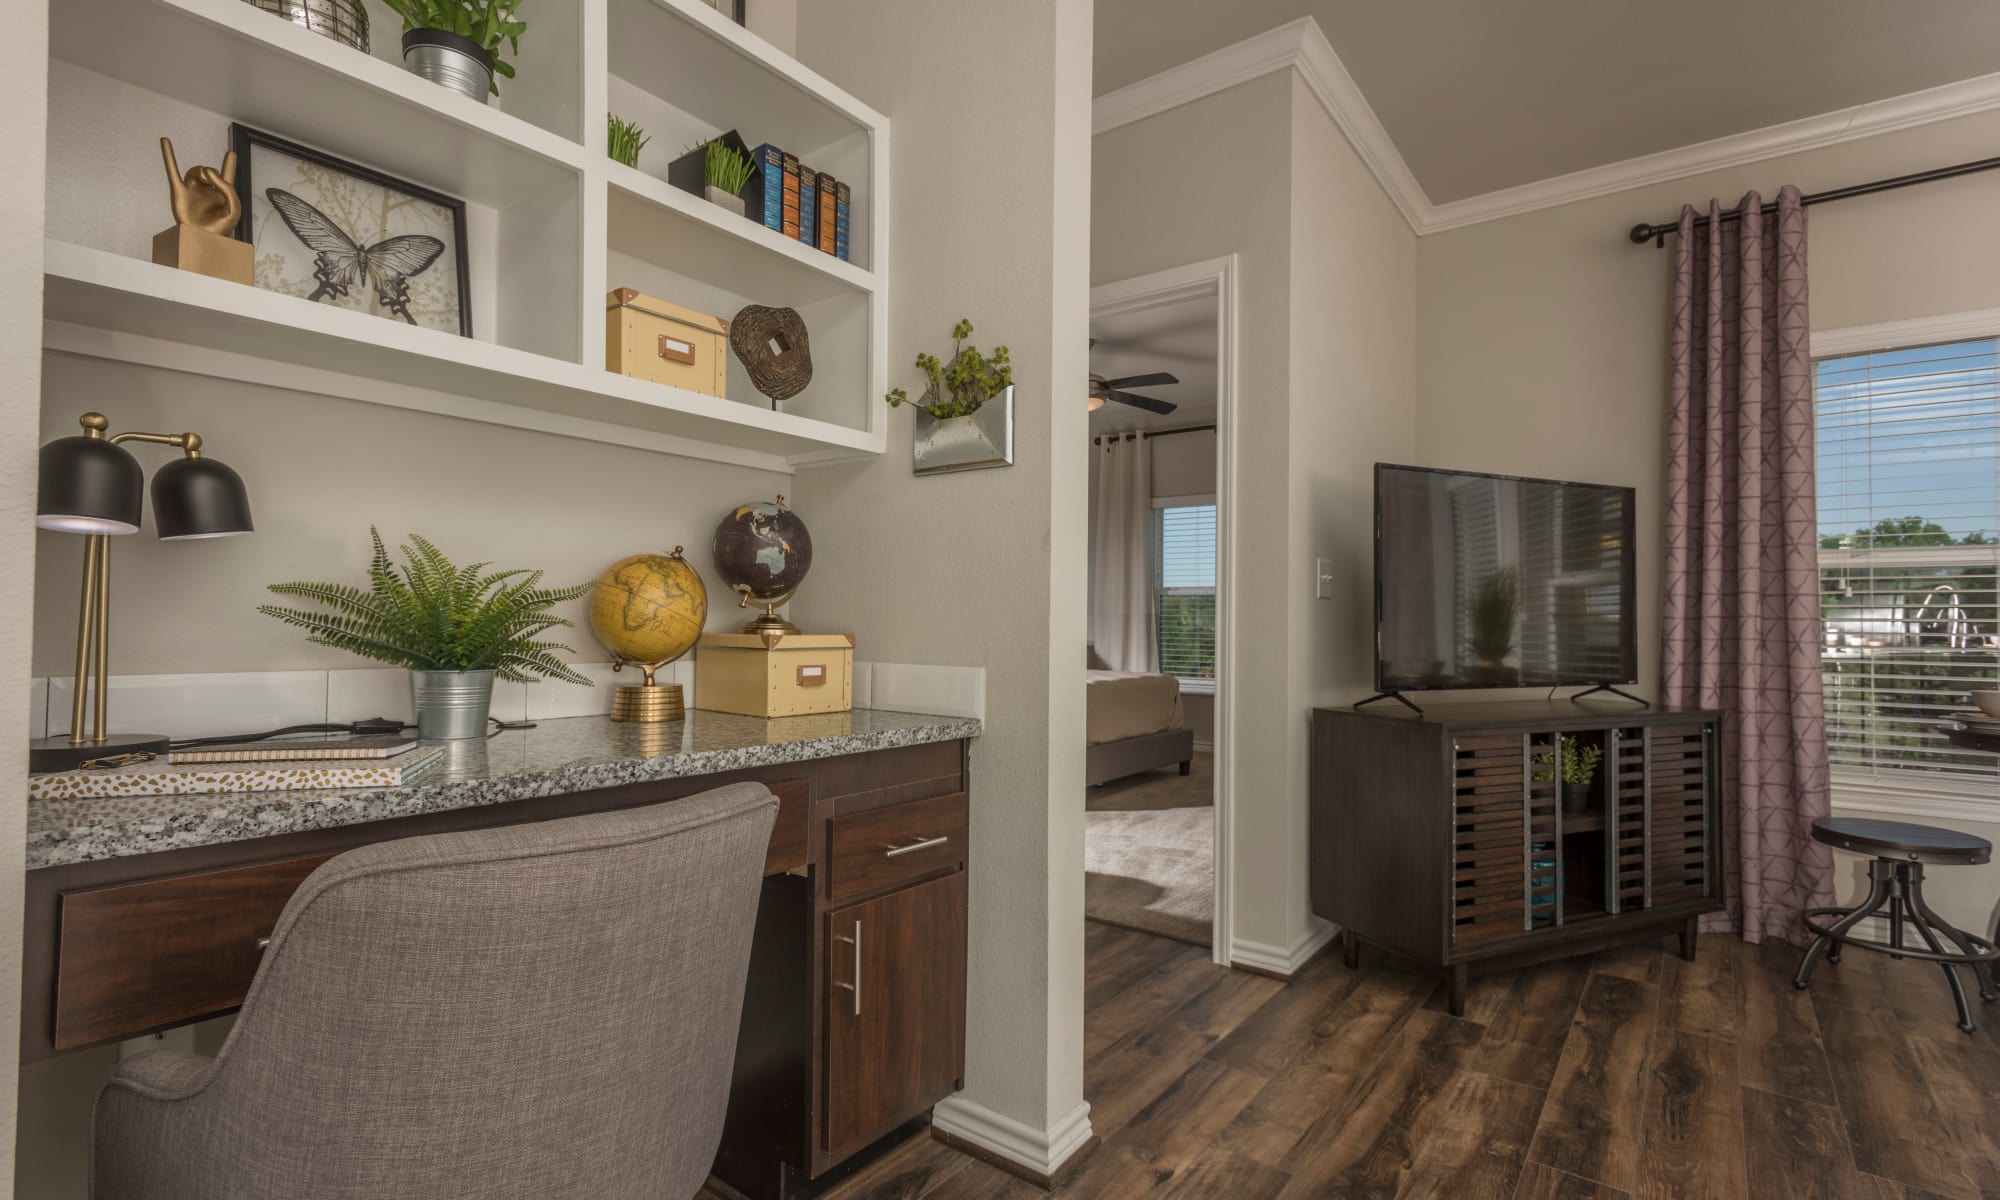 Apartments w/ a Built-in Desk at The Abbey at Dominion Crossing in San Antonio, Texas